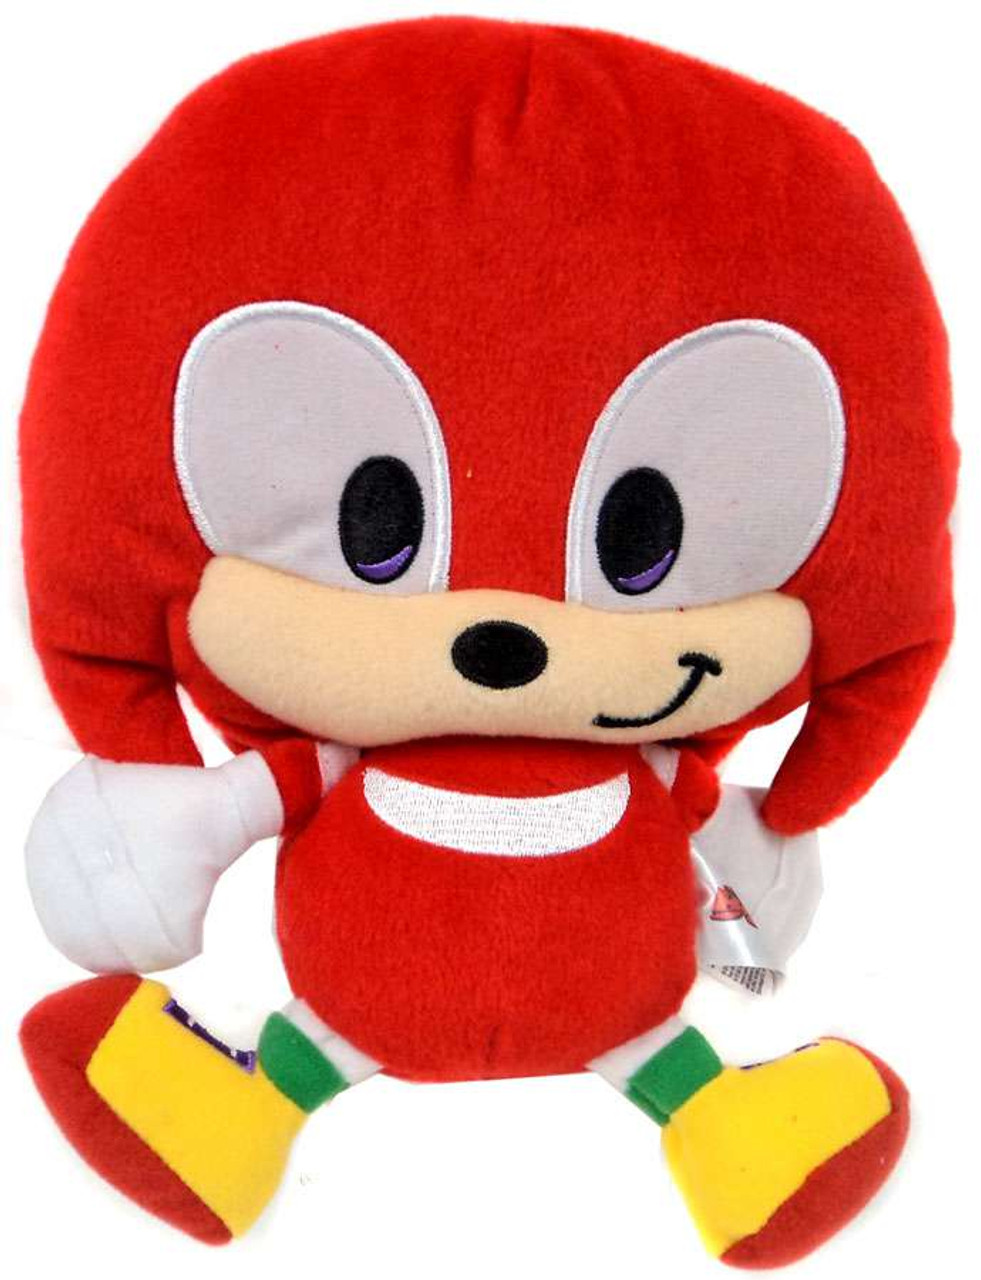 knuckles the echidna plush